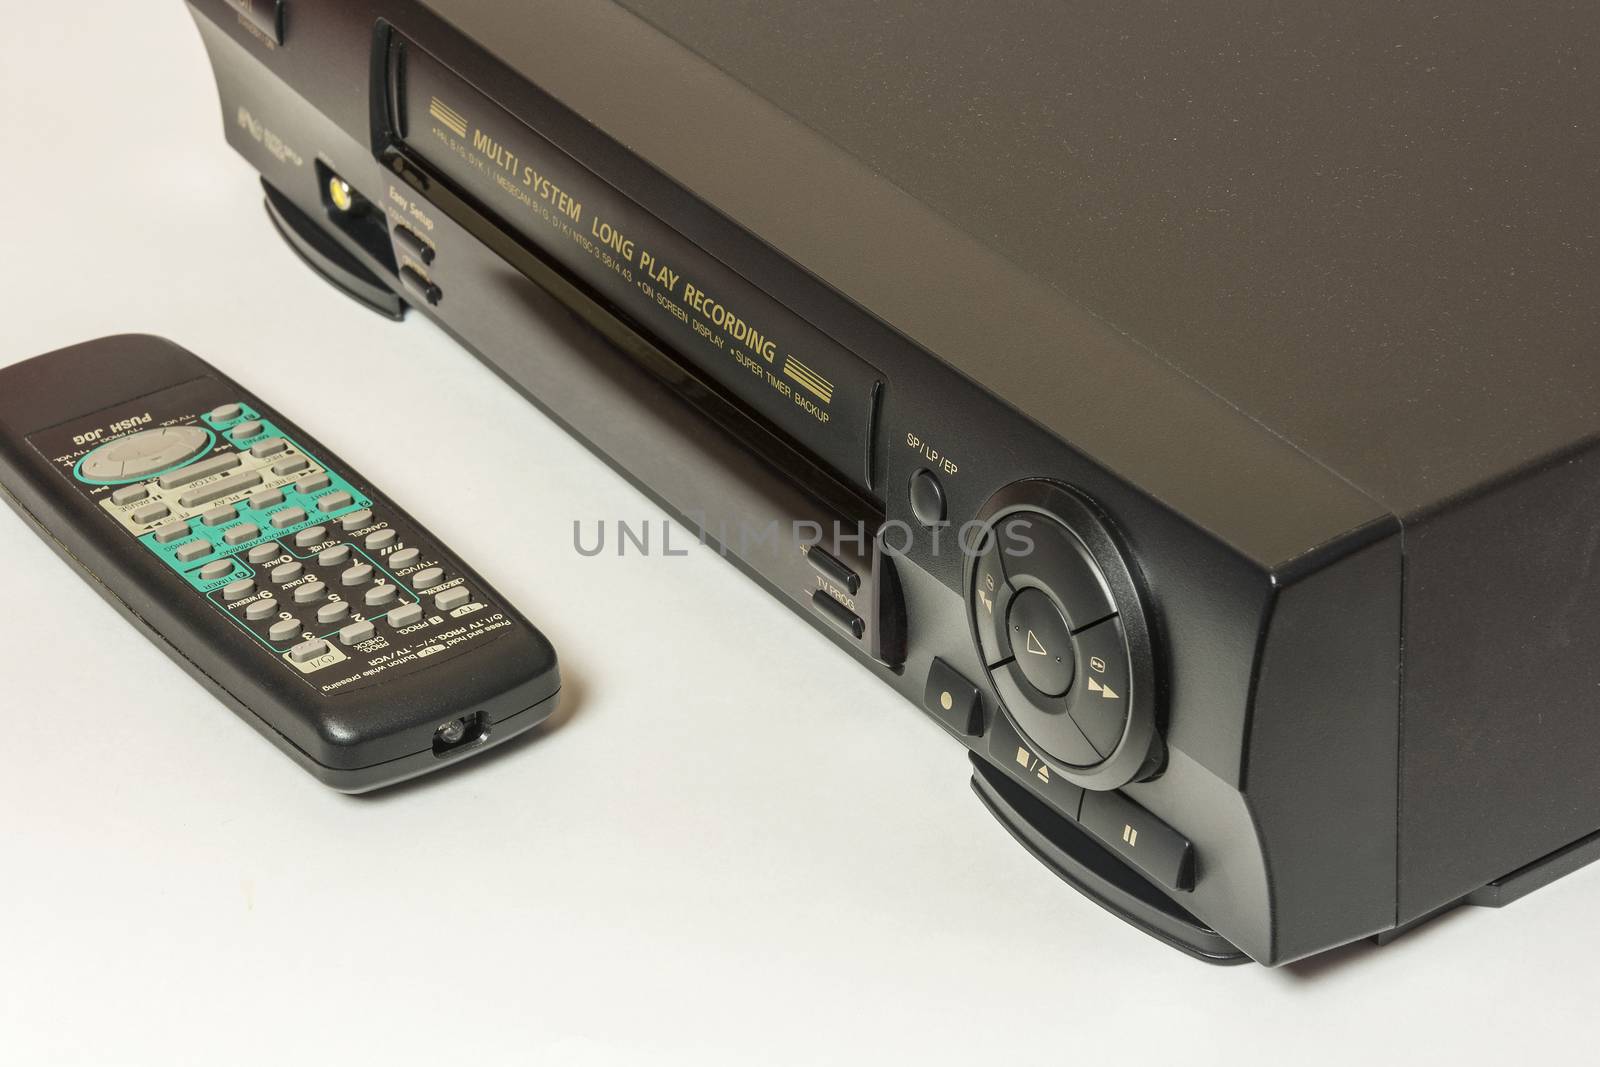 The front panel is home video recorder for playback of home movies and videotapes to remote control.
